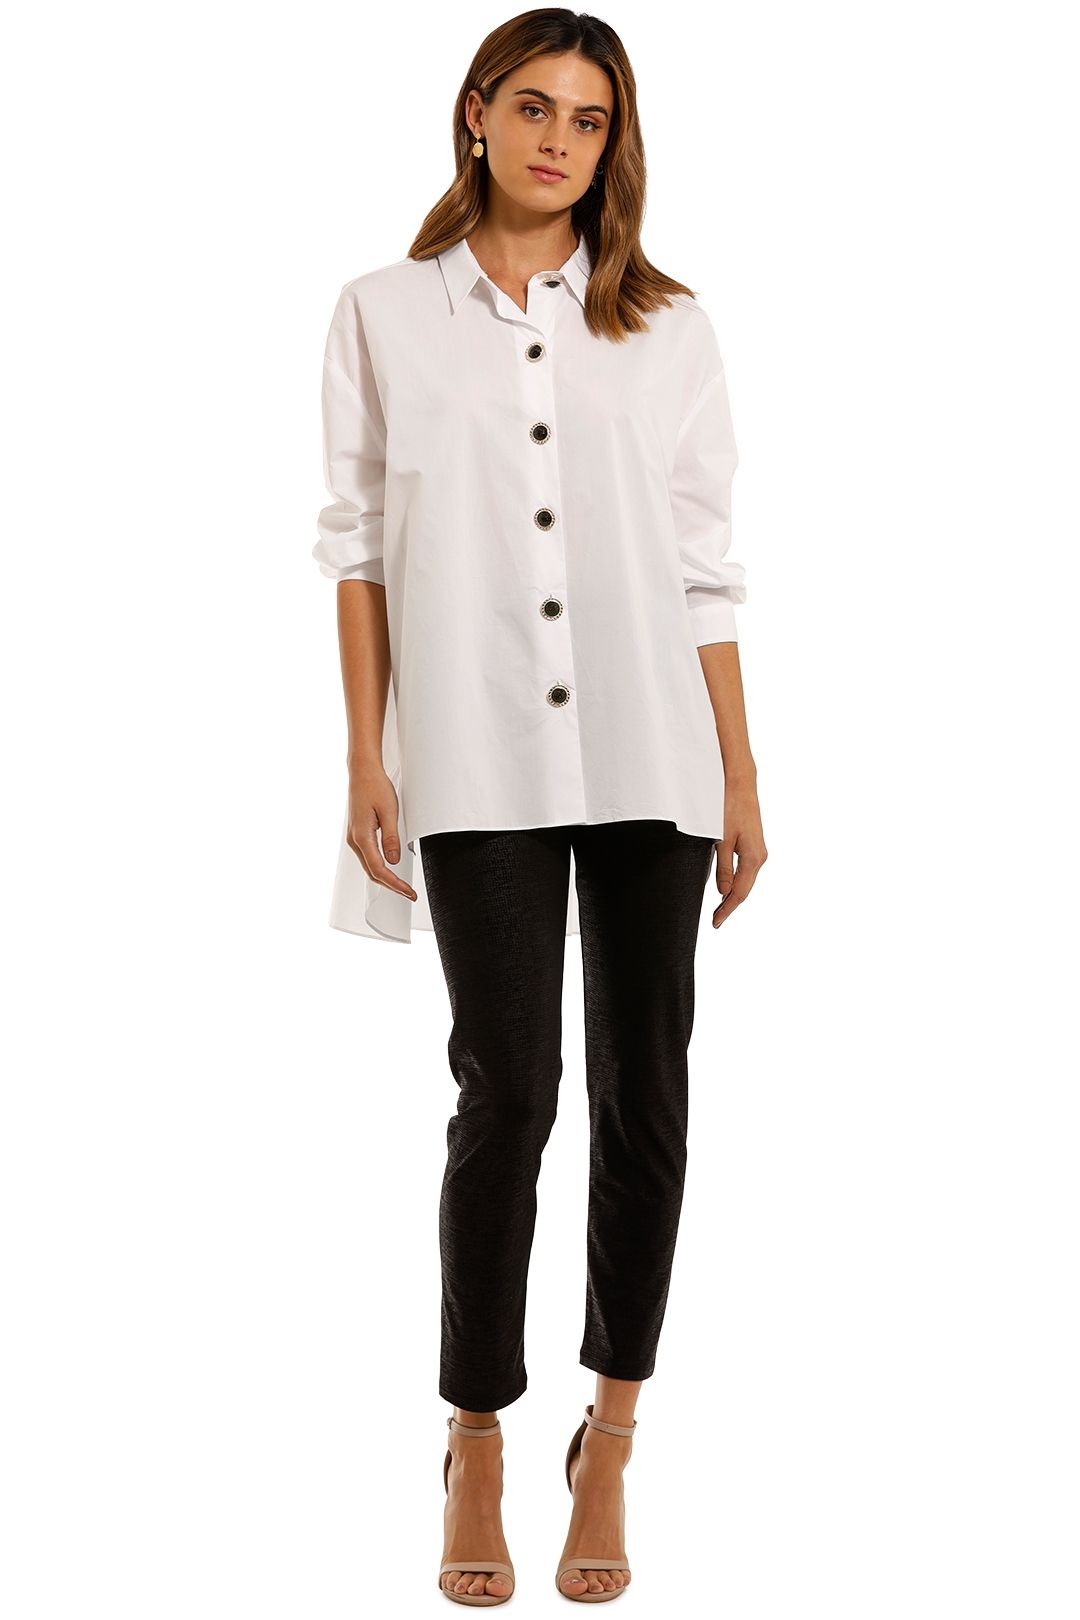 Cooper by Trelise Cooper Button Me Up Shirt white